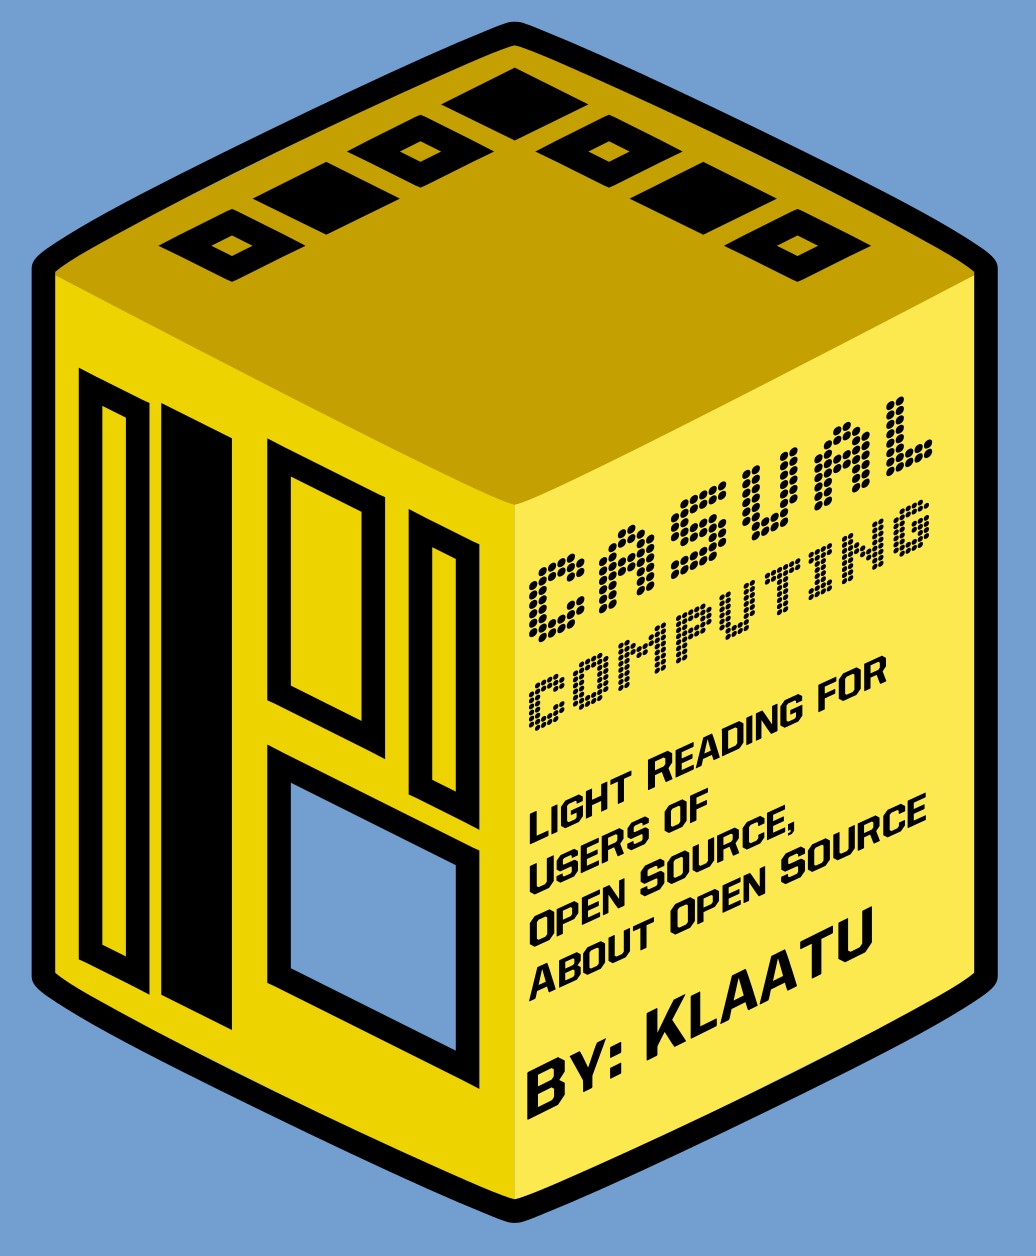 Casual Computing: Light Reading for Users of Open Source, About Open Source